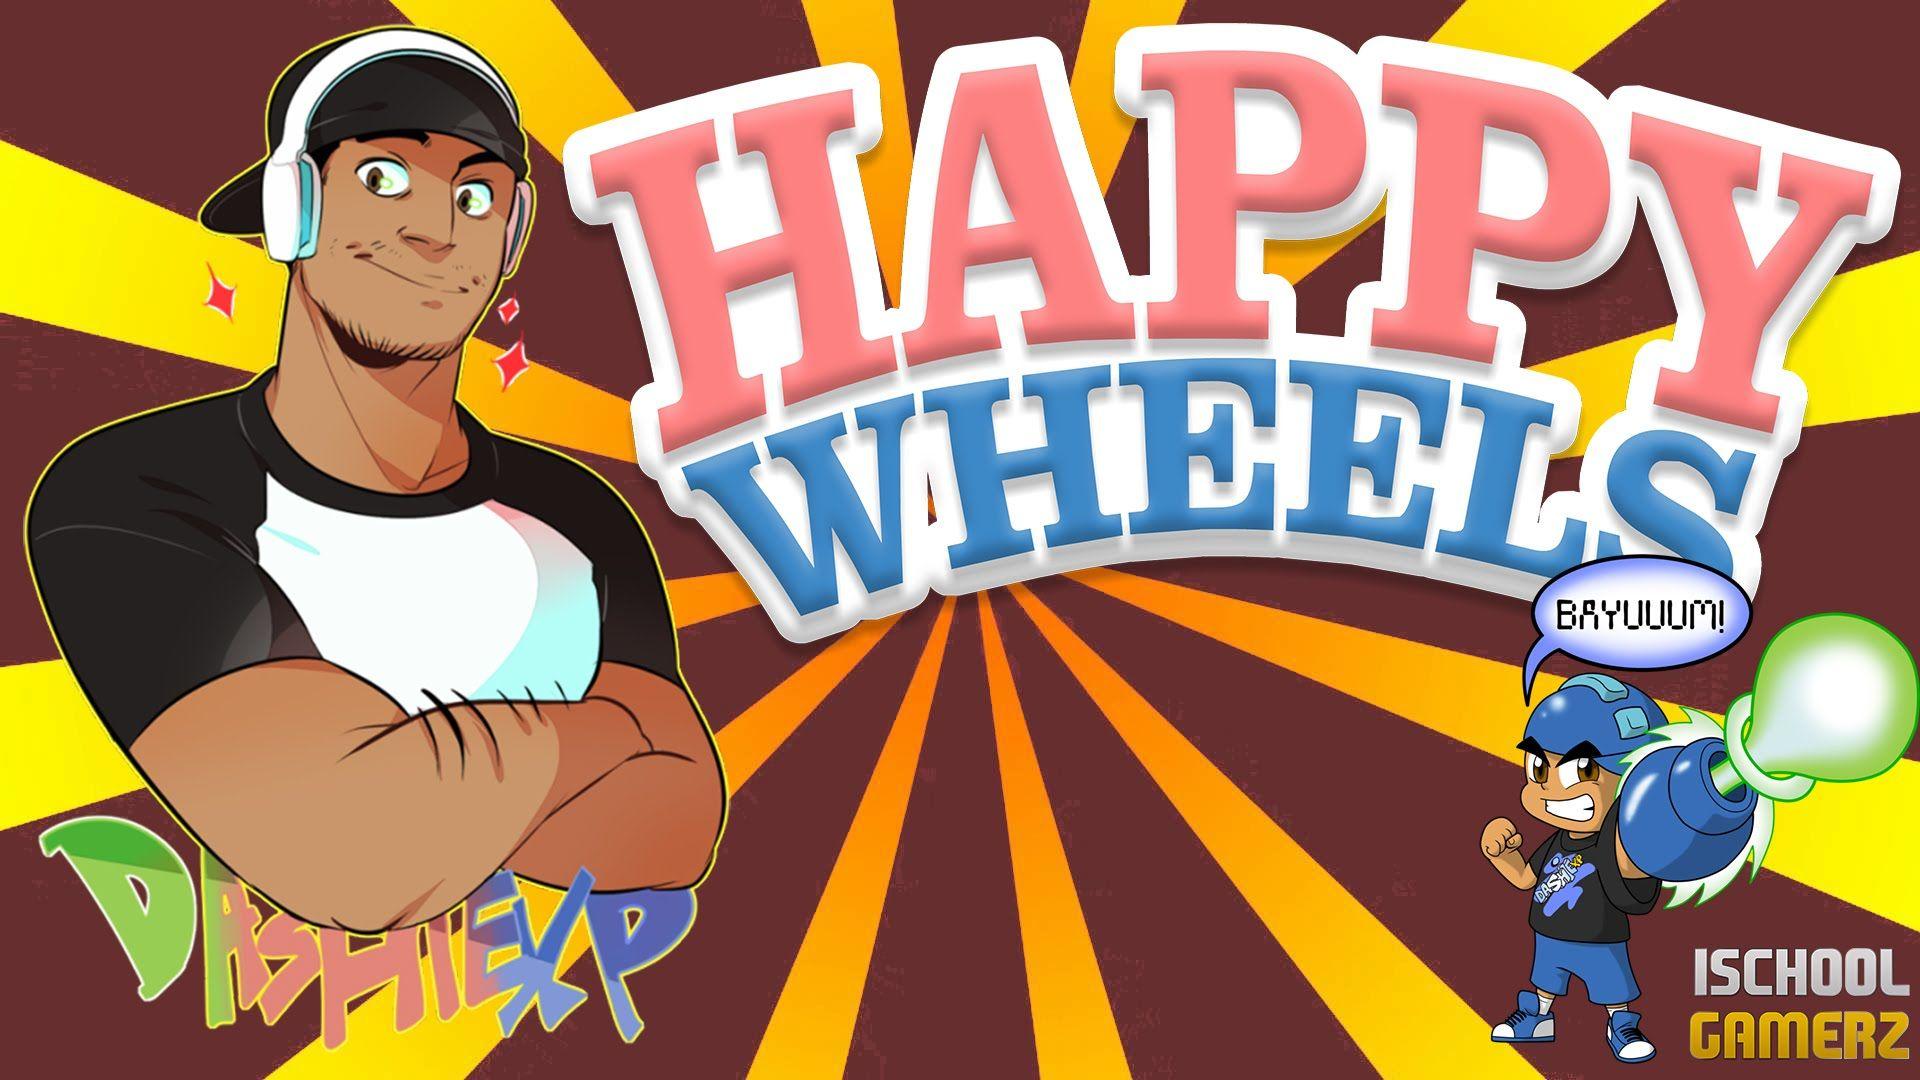 DASHIEGAMES PLAYED OUR LEVEL ON HAPPY WHEELS!!!. Image